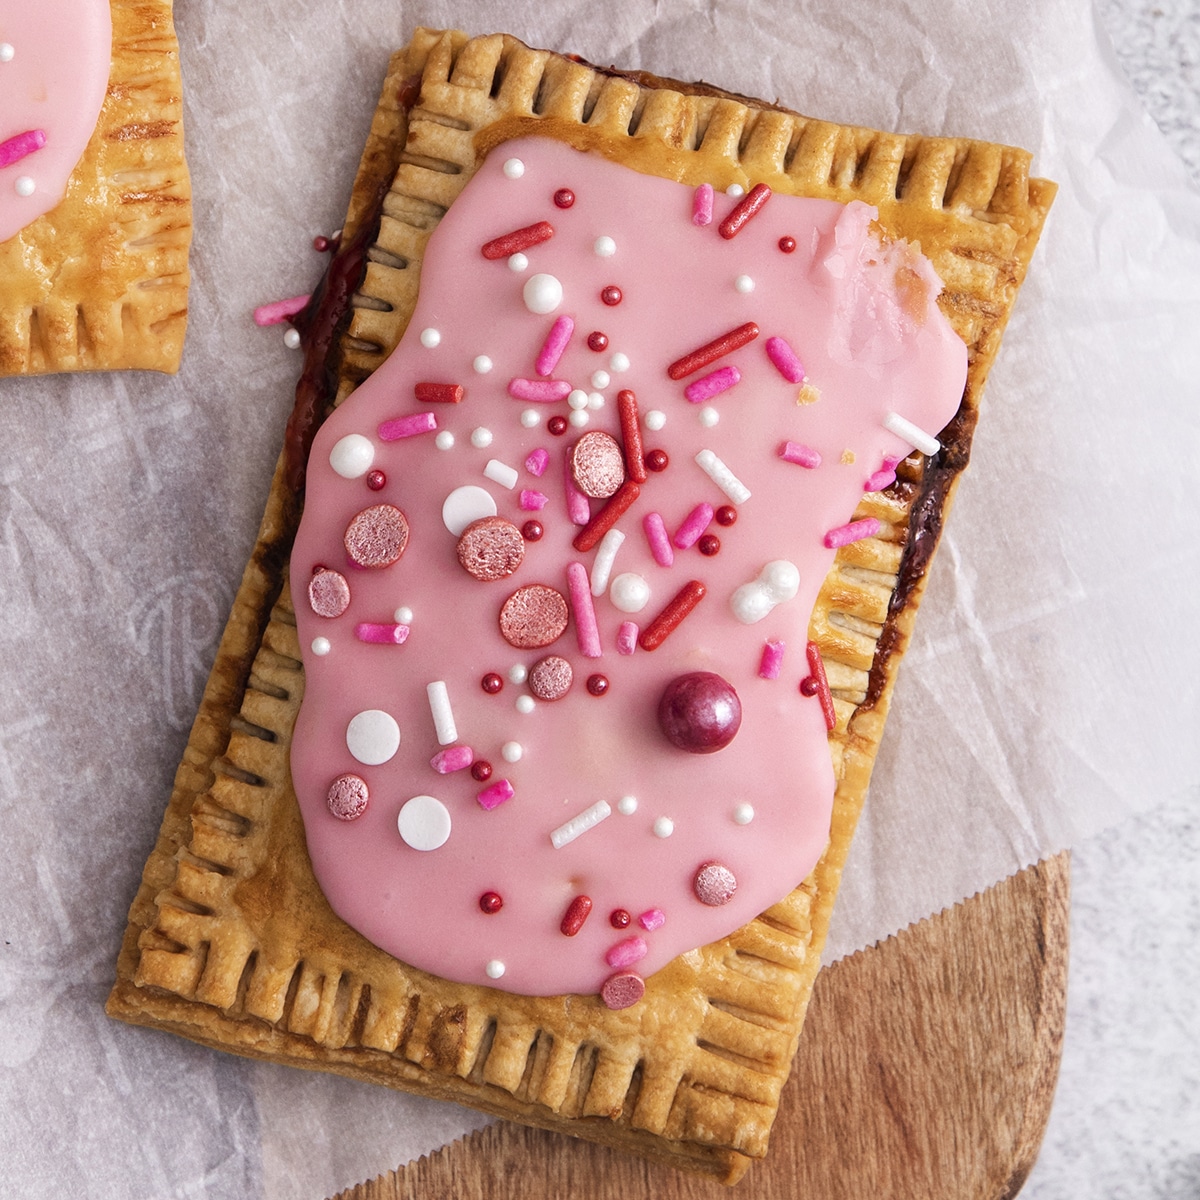 a homemade pastry air fryer pop tart with pink frosting and sprinkles, on parchment paper